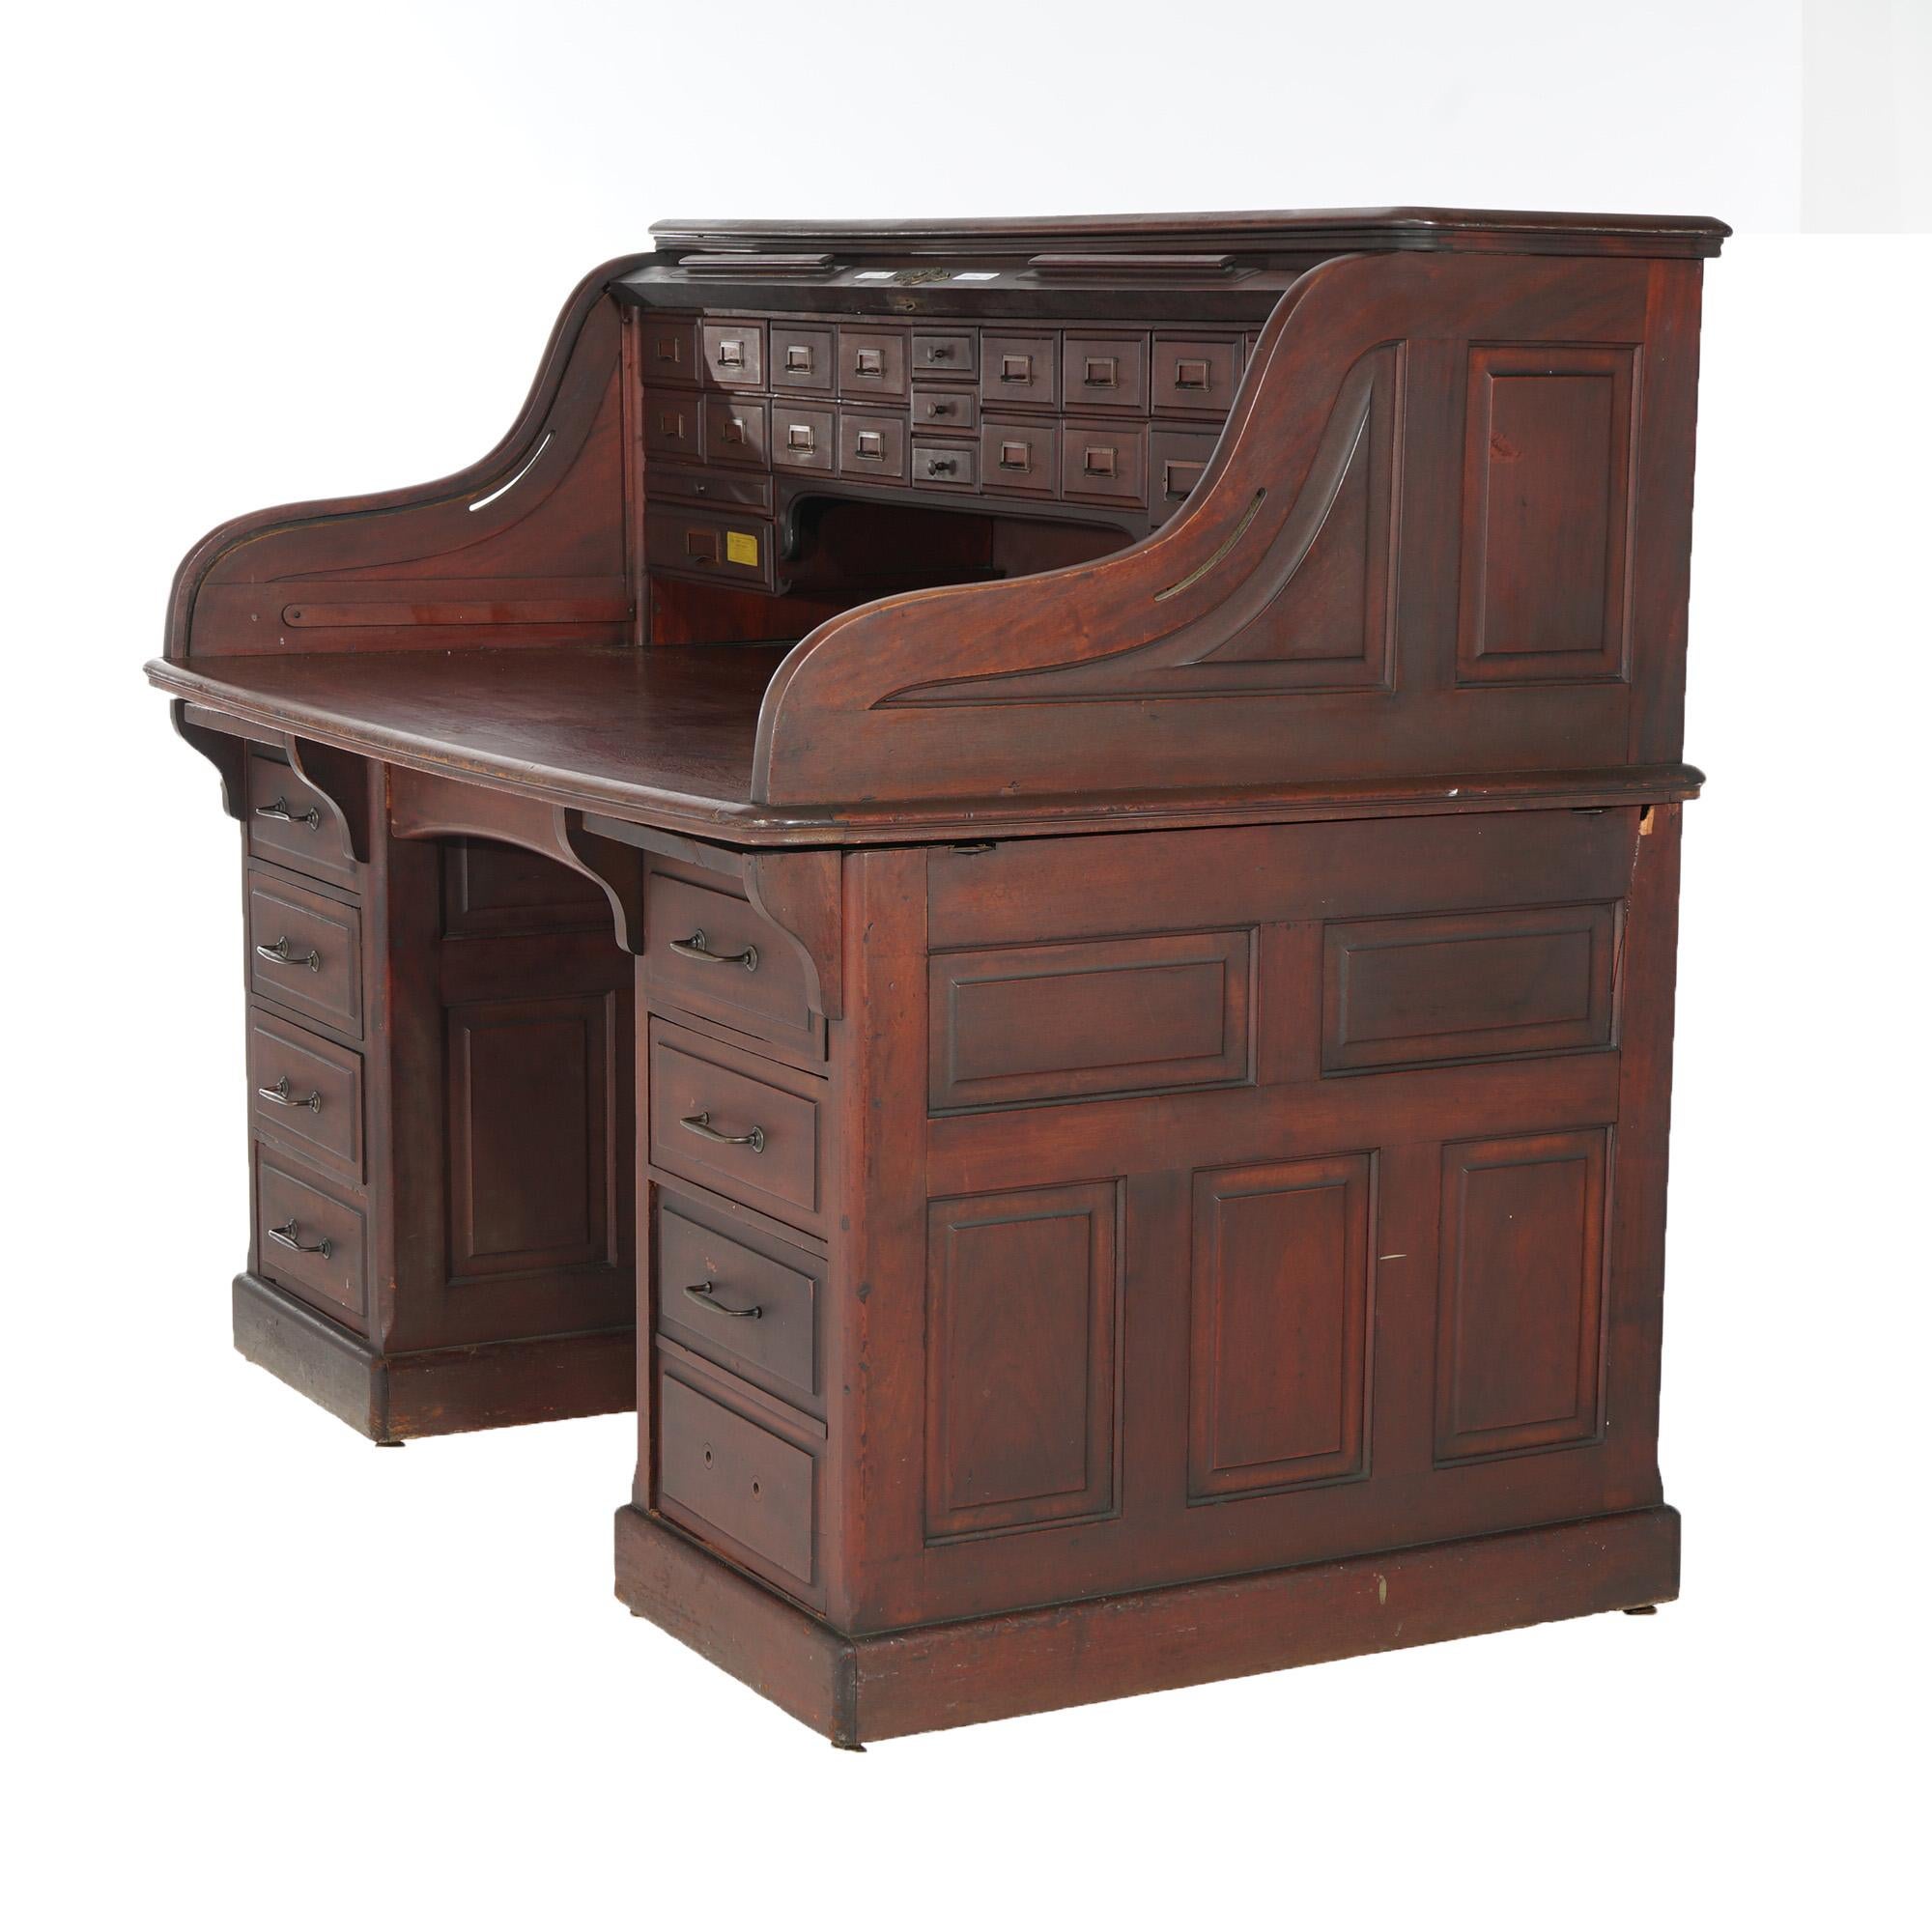 Antique Mahogany S-Roll Top Desk with Full Interior by Gunn, c1900 For Sale 8